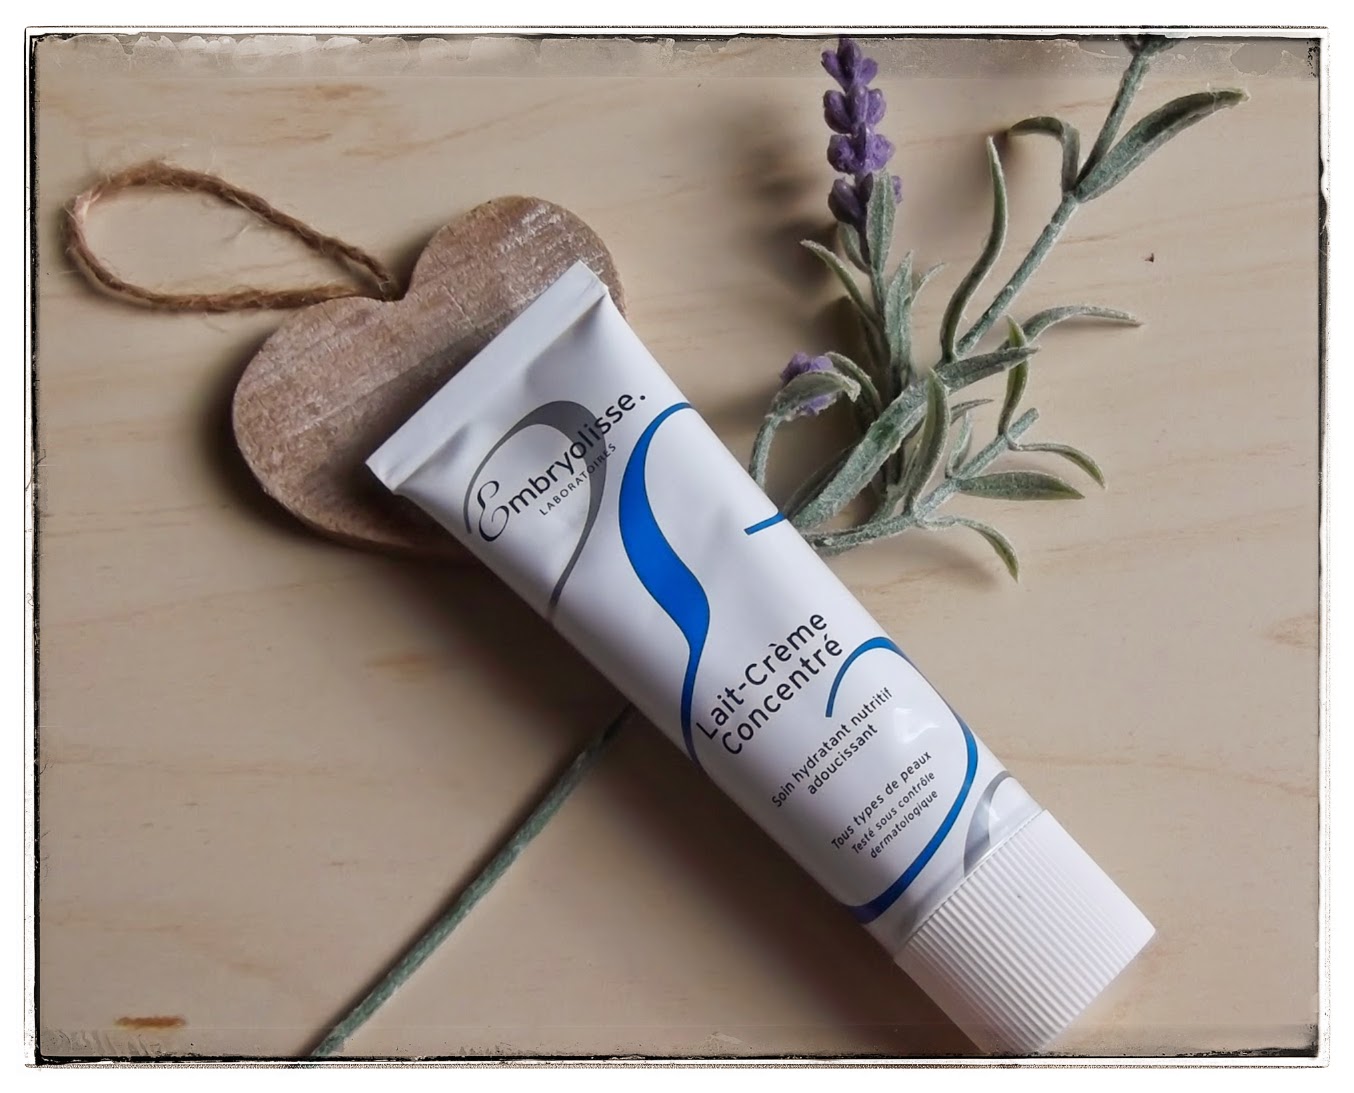 Embryolisse Concentrate uk beauty blog review